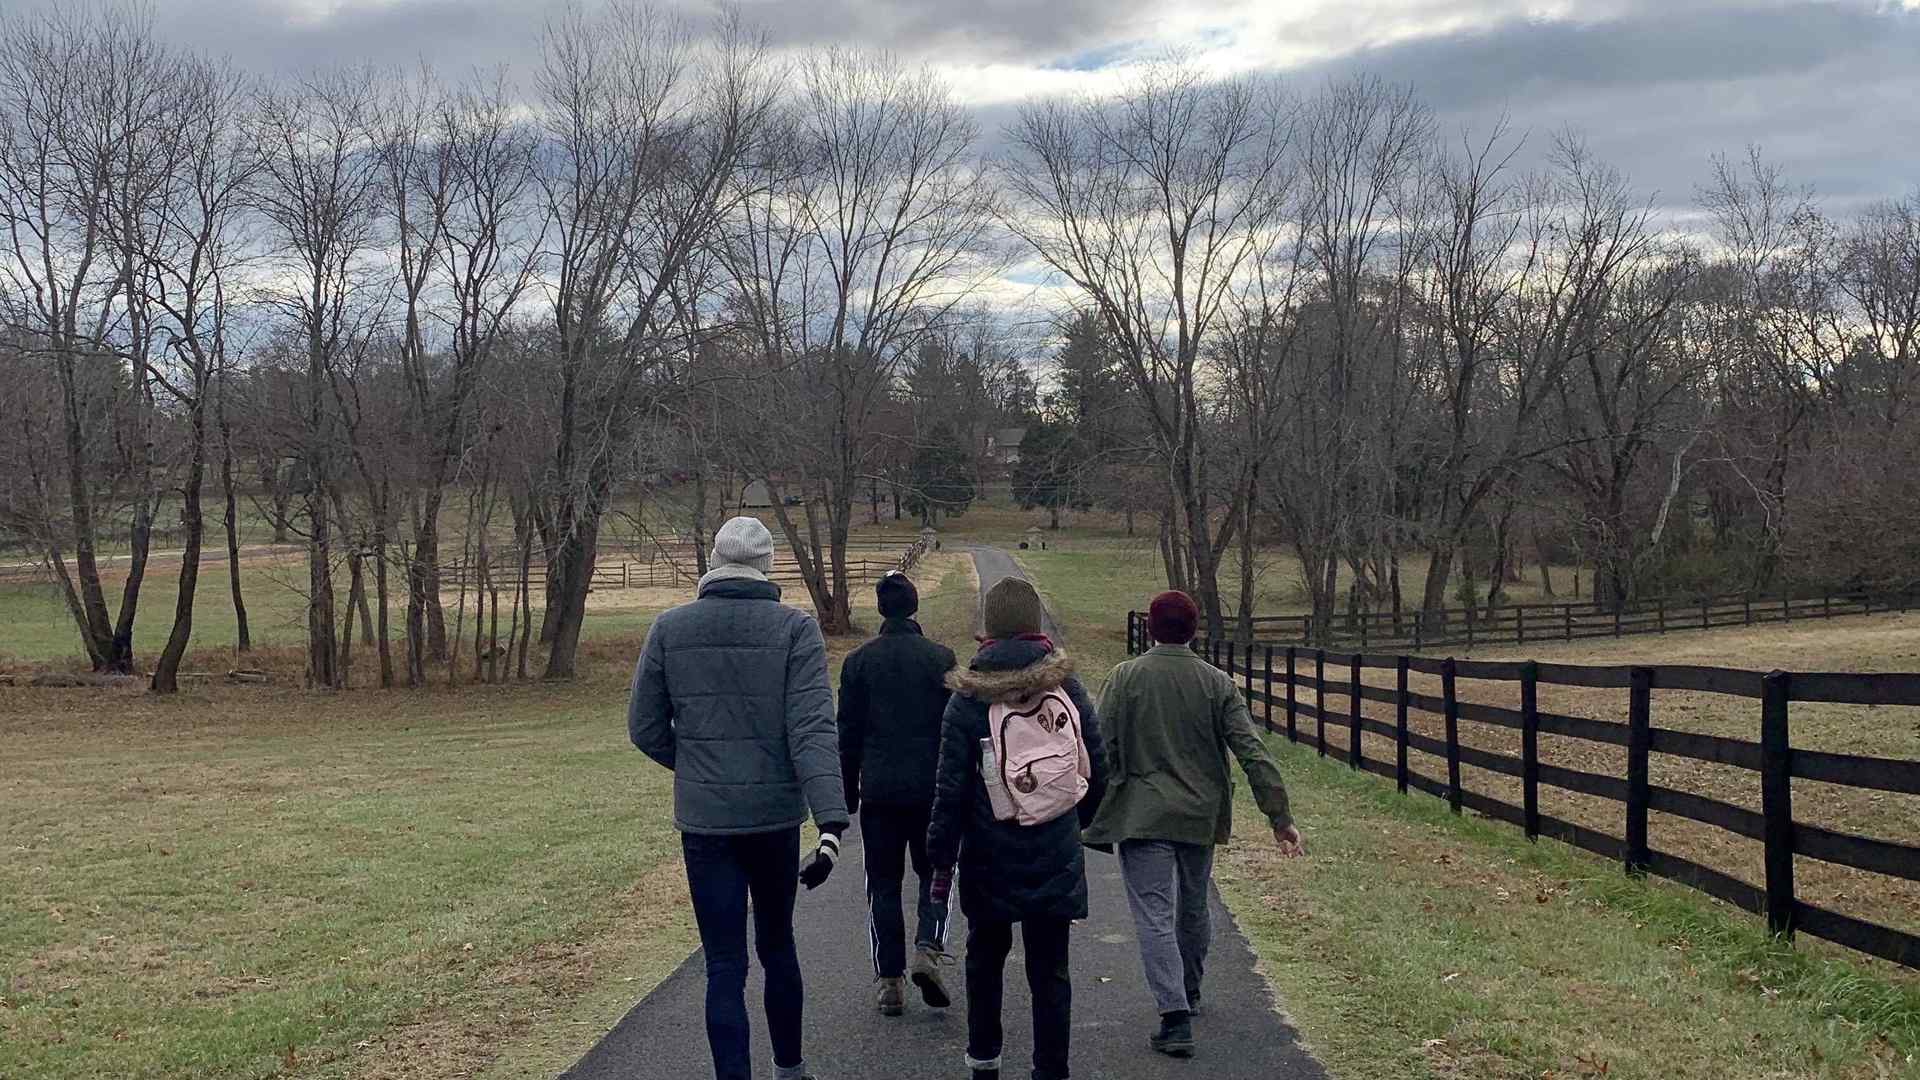 A group of students walk through a field